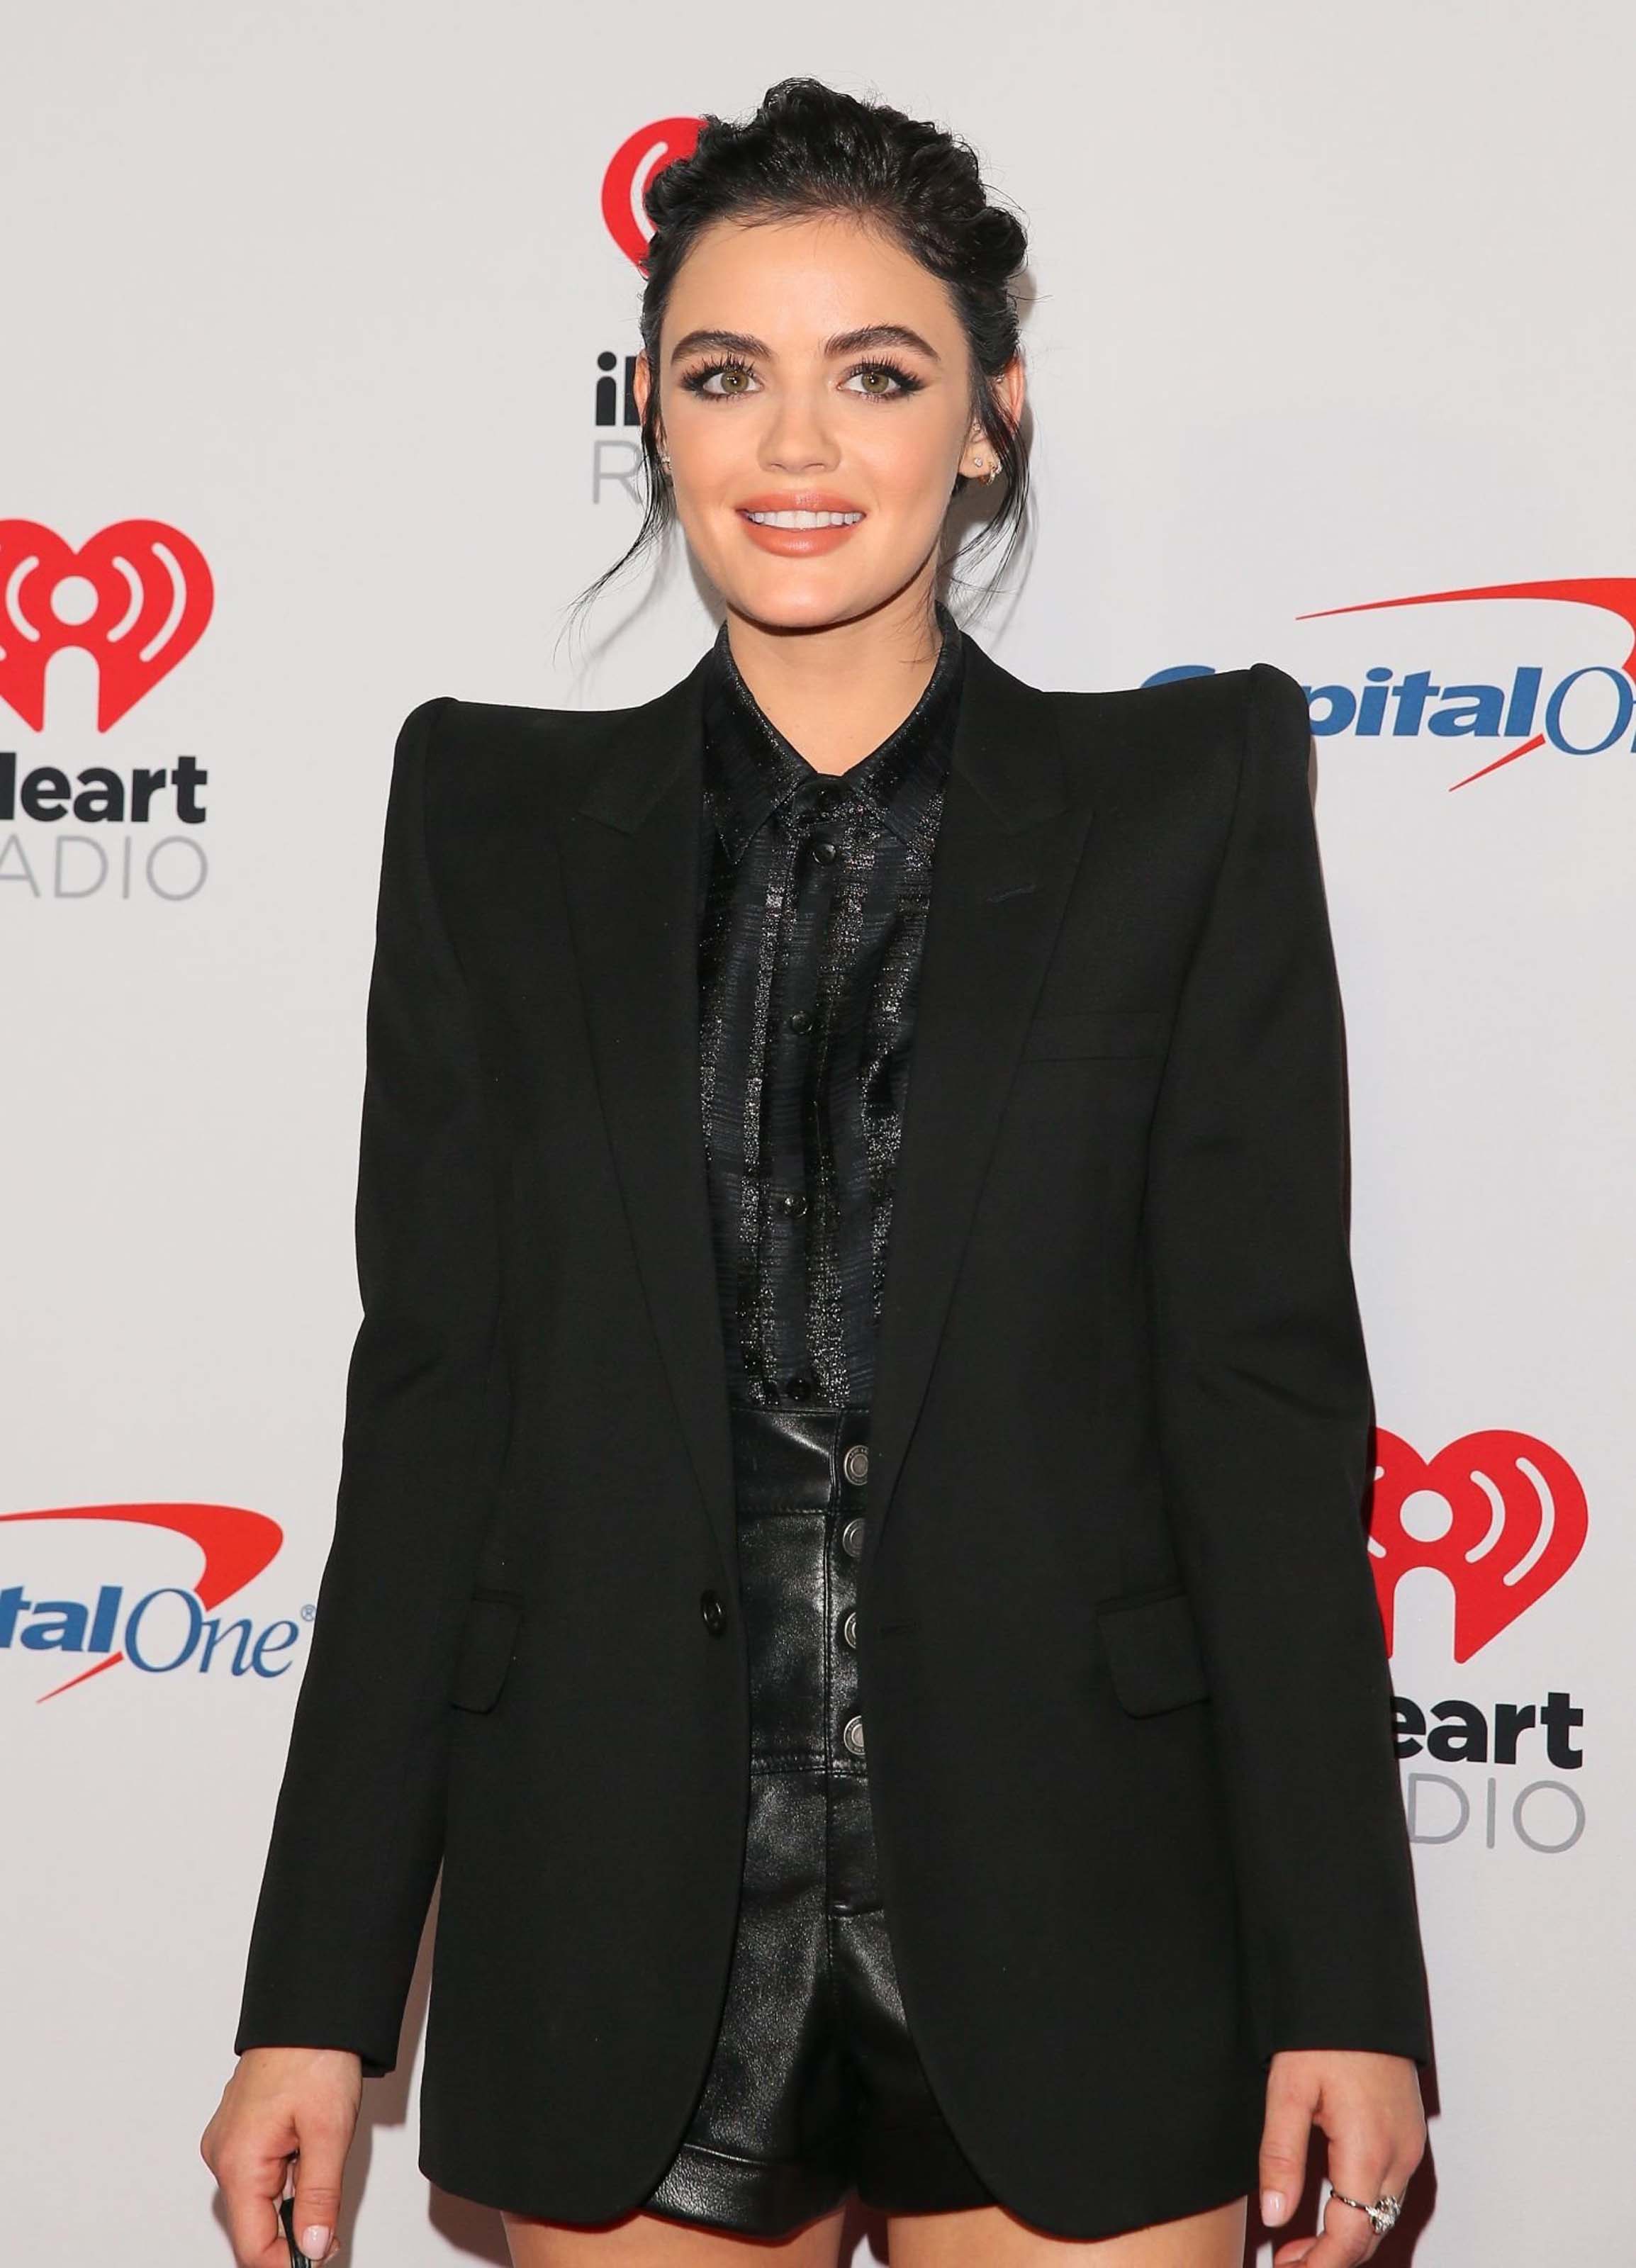 Lucy Hale attends iHeartRadio Music Festival